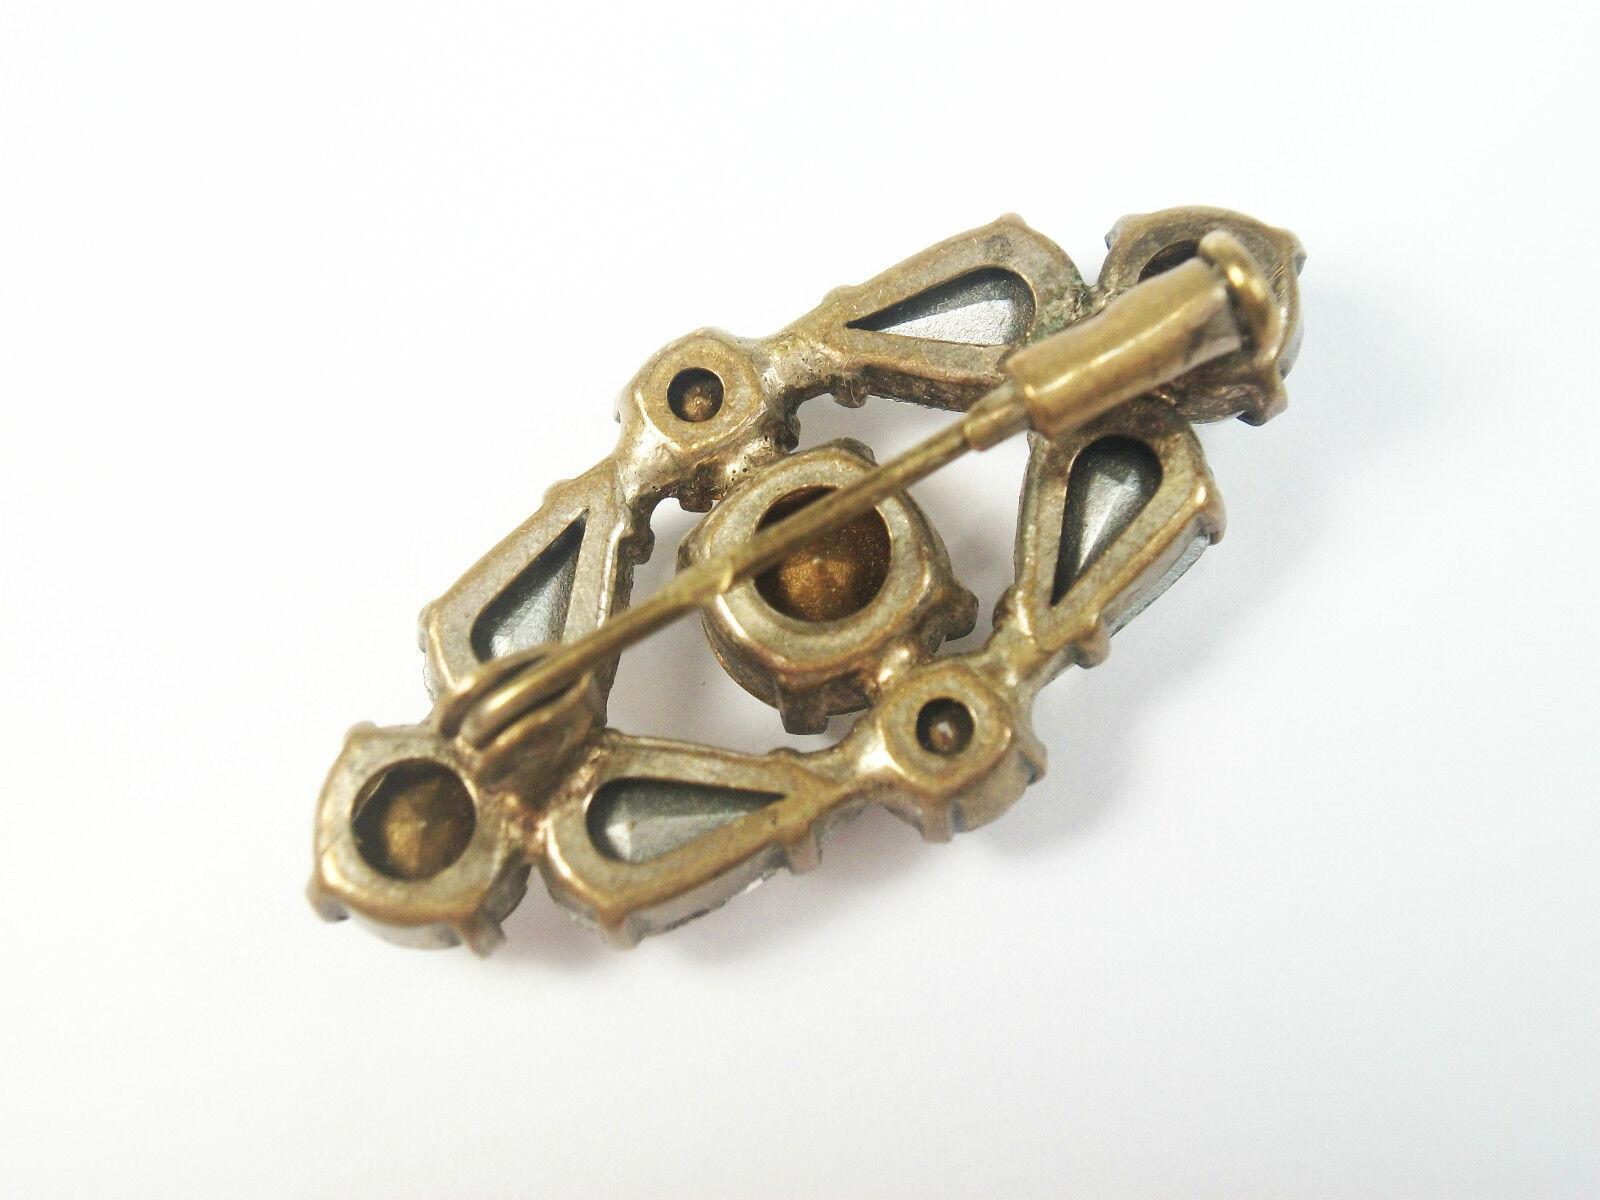 Vintage Rhinestone Brooch - Trombone Clasp - Unsigned - Circa 1950's For Sale 1